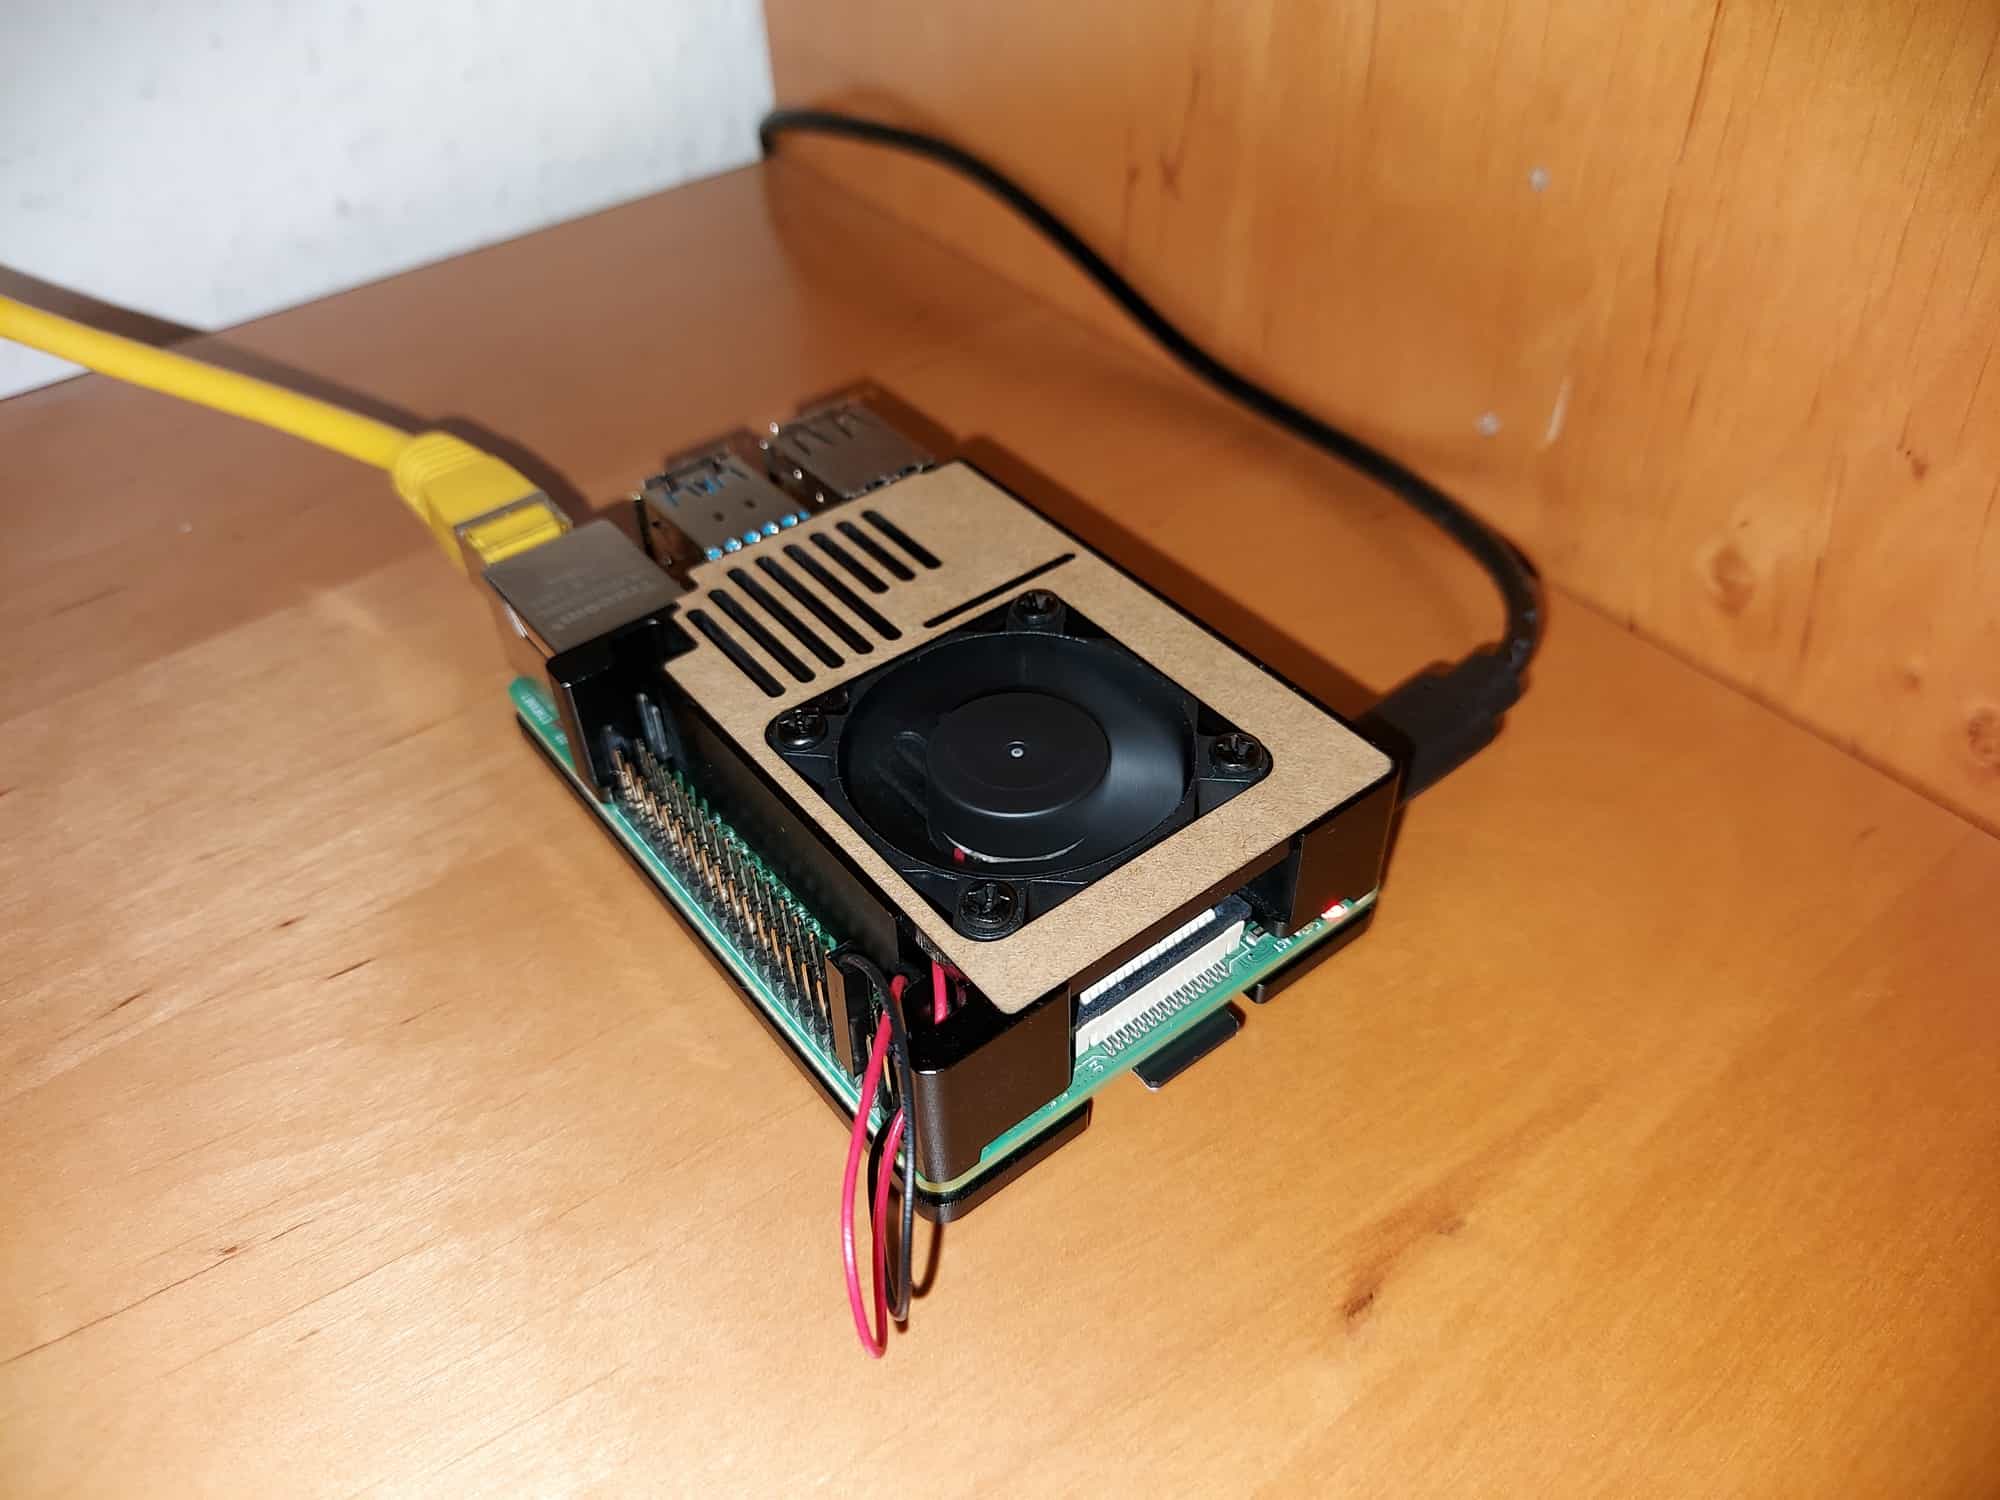 The Pi in the new case